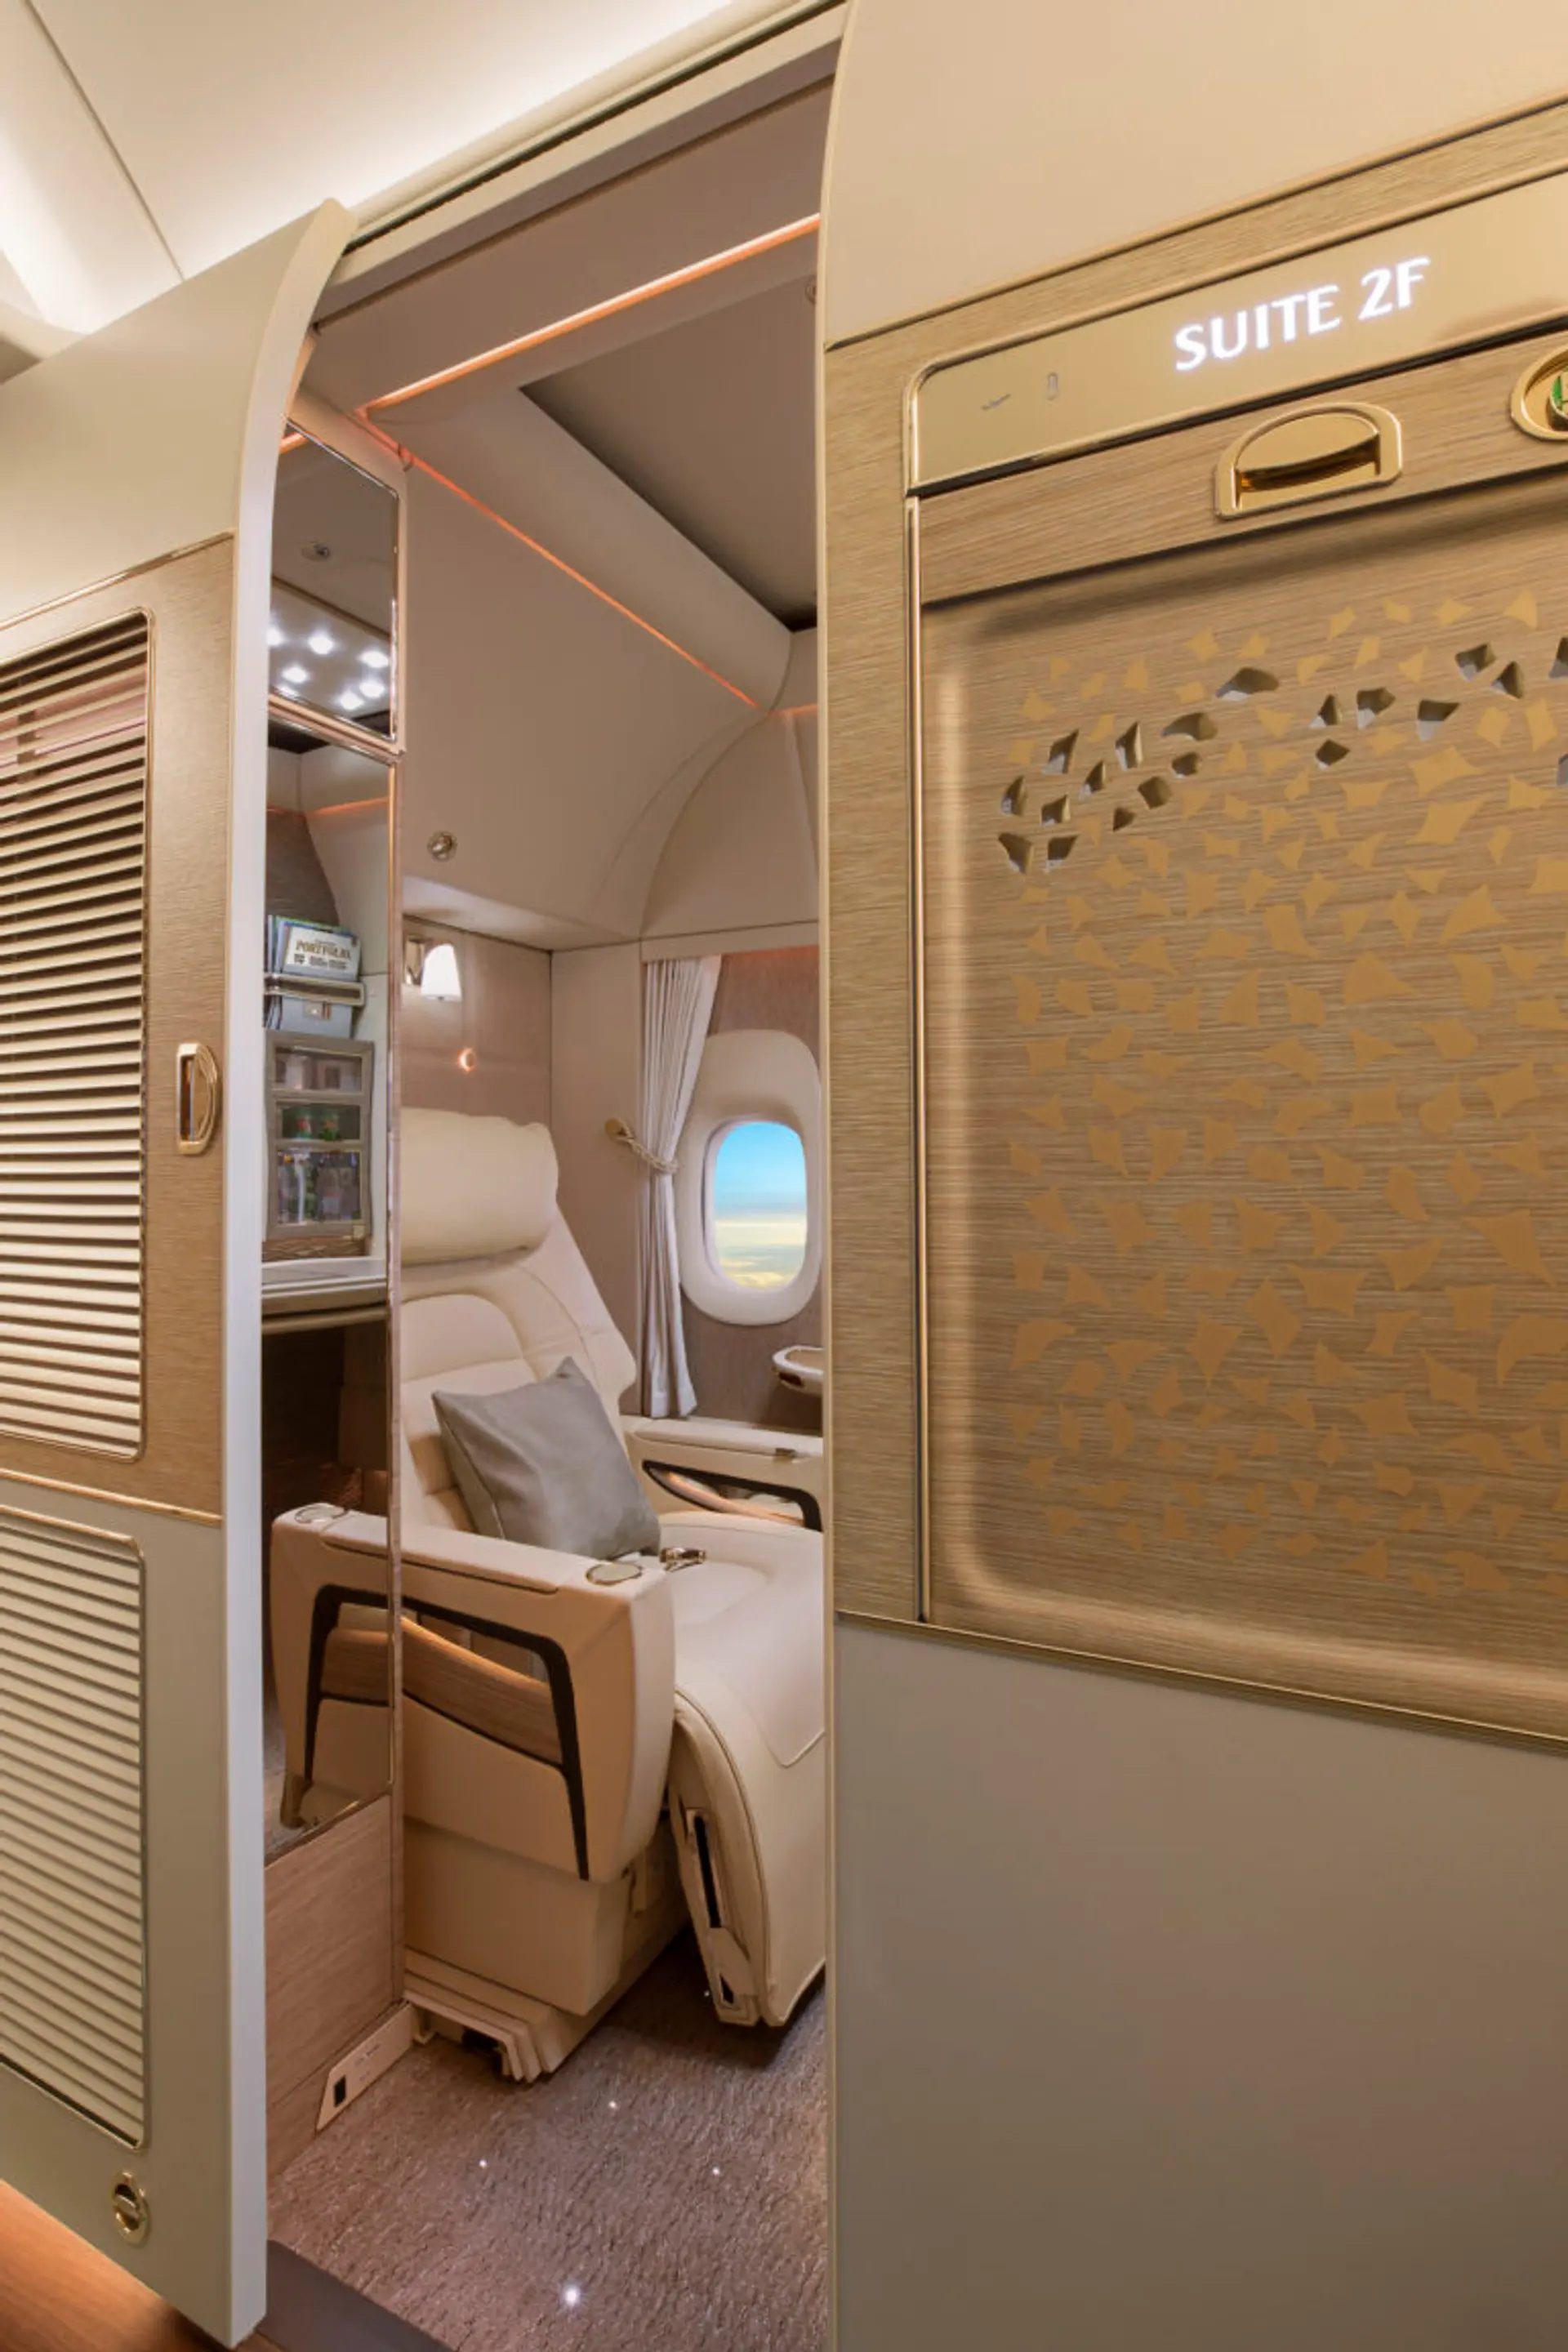 Emirates-First-Class-fully-enclosed-private-suites.jpg